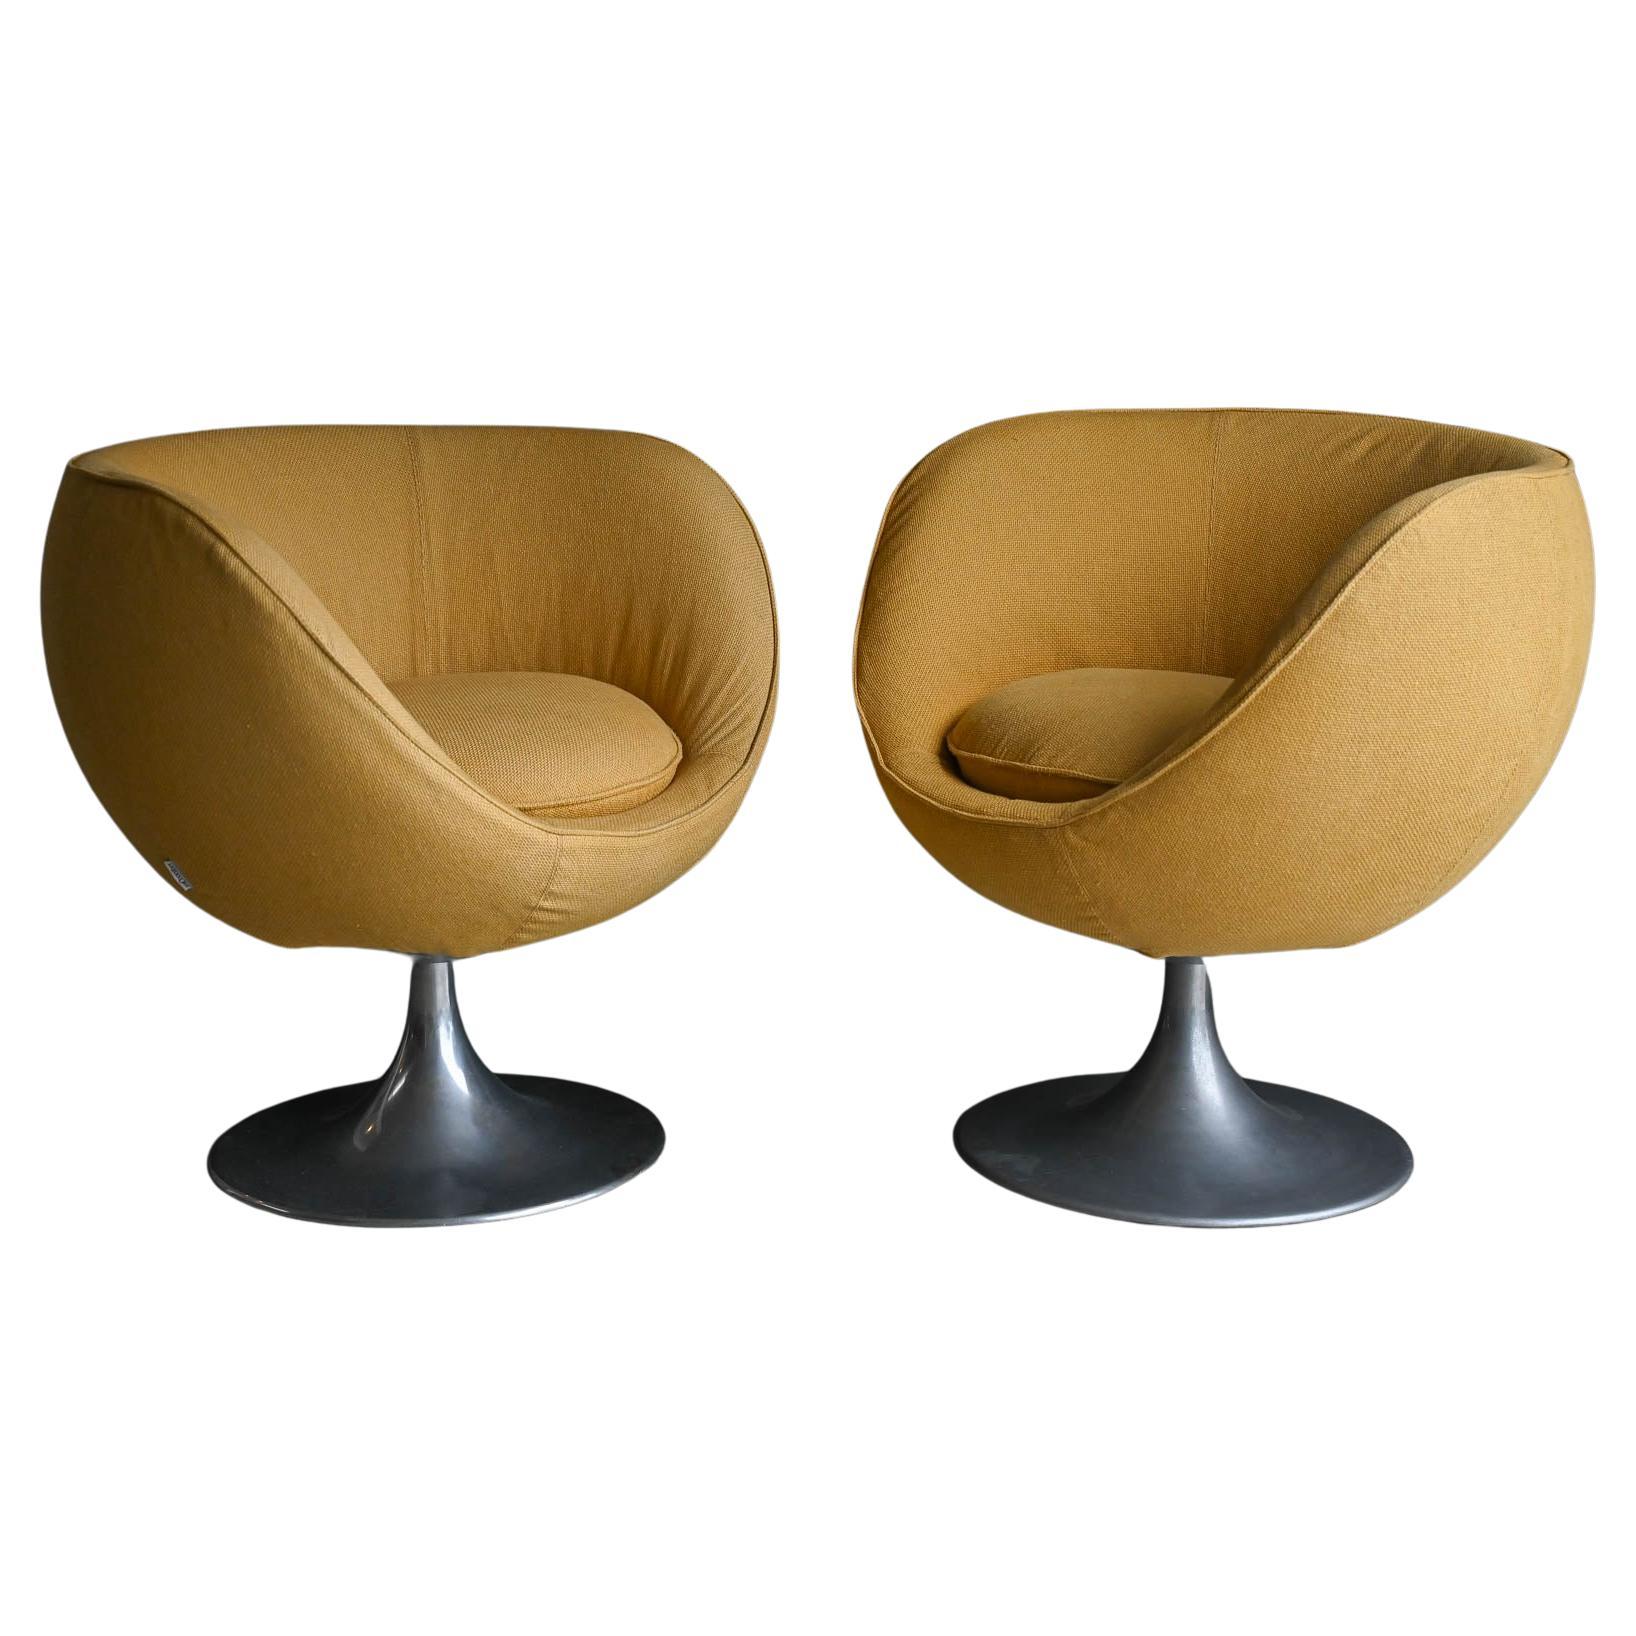 Pair of Swivel Lounge Chairs by mCconfort, Italy, ca. 1990 For Sale